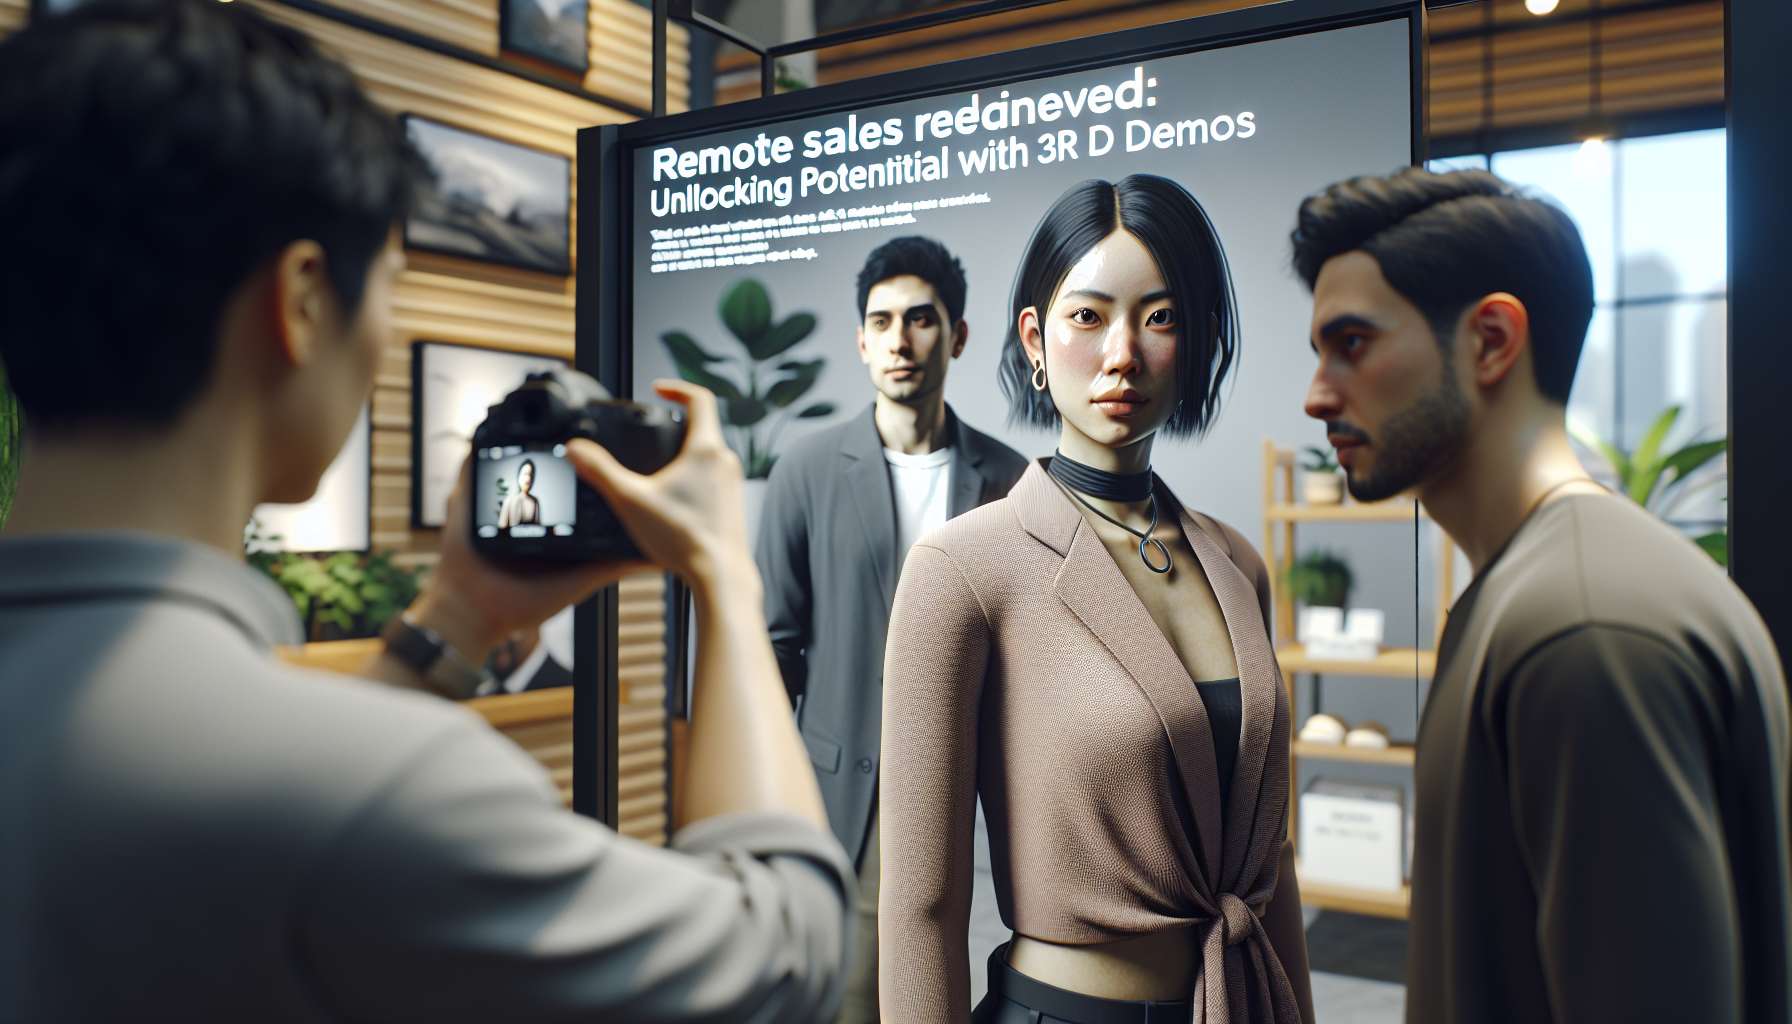 Remote Sales Redefined: Unlocking Potential with 3D AR Demos